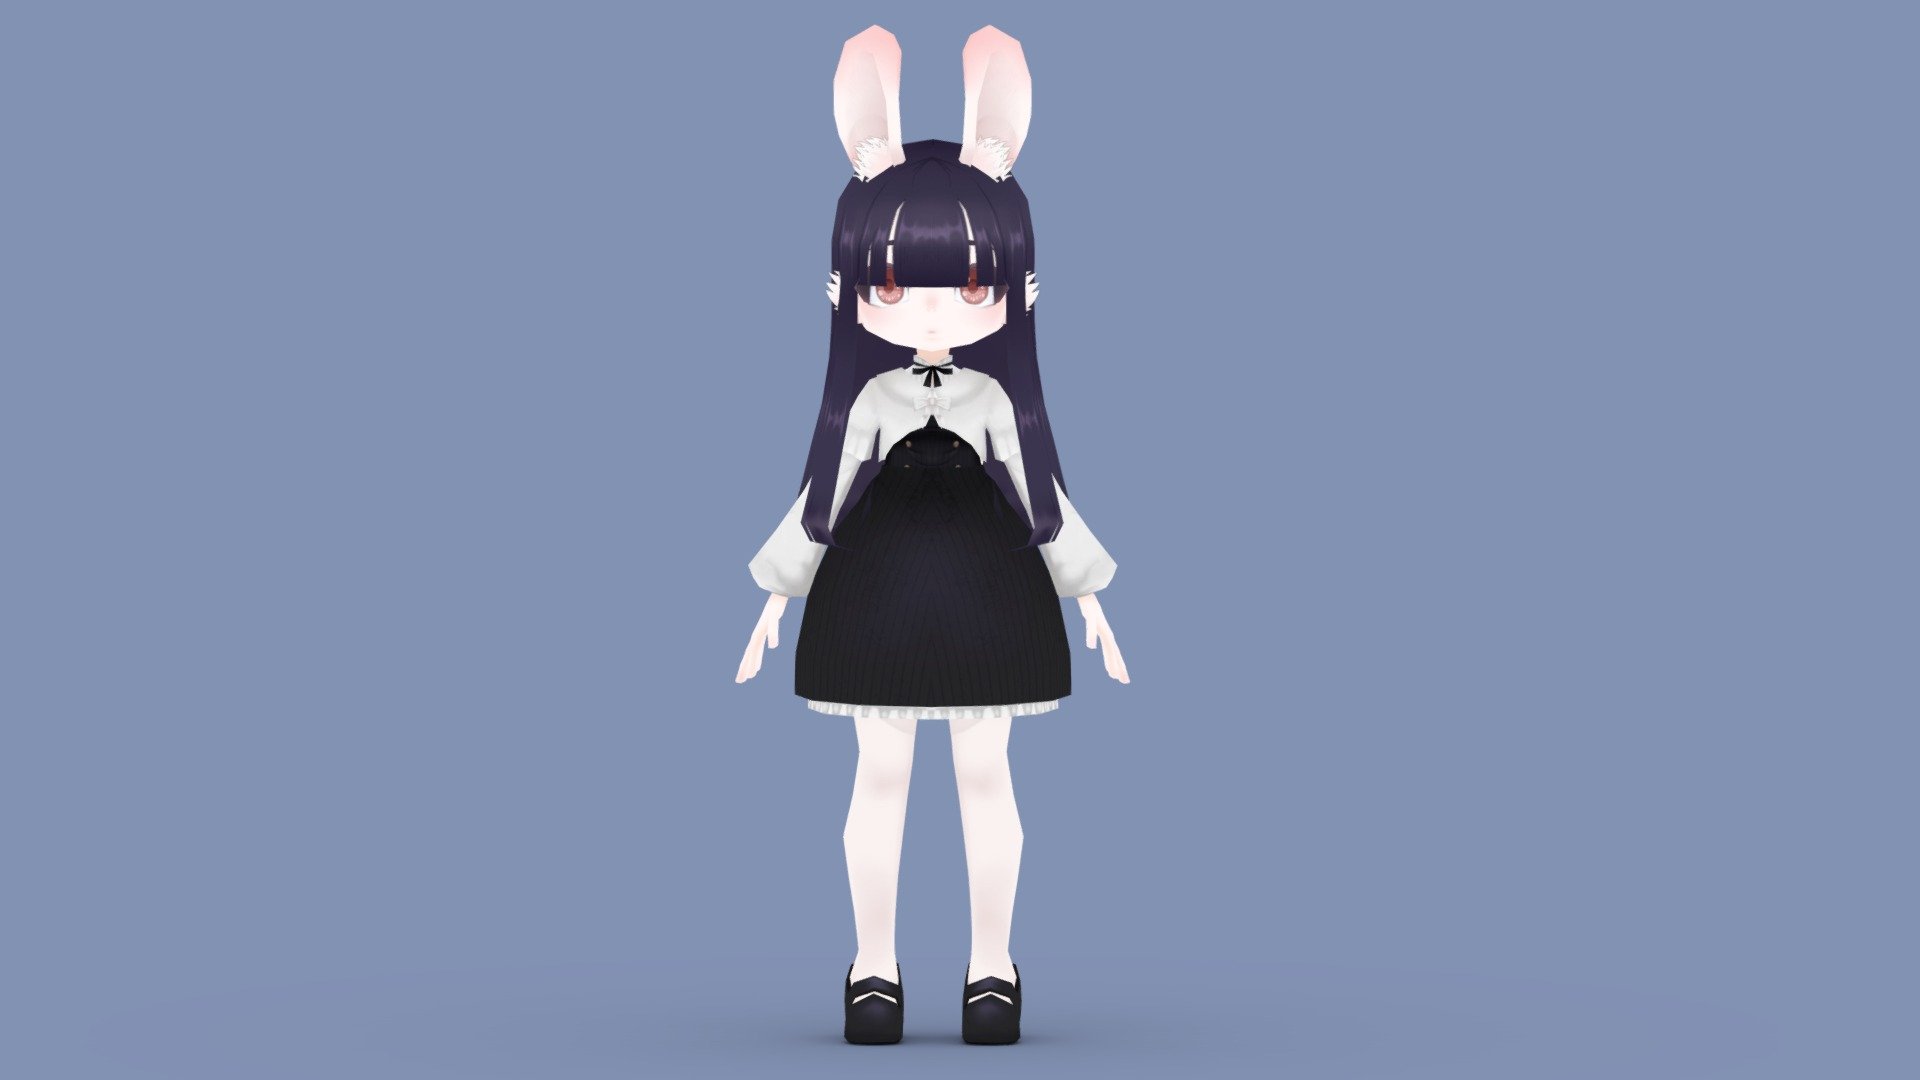 quick 2 day project, not rigged, low poly.

modeled in Maya, textured in substance painter - [Lowpoly][APose] Bunny girl - Download Free 3D model by Kanna-Nakajima 3d model